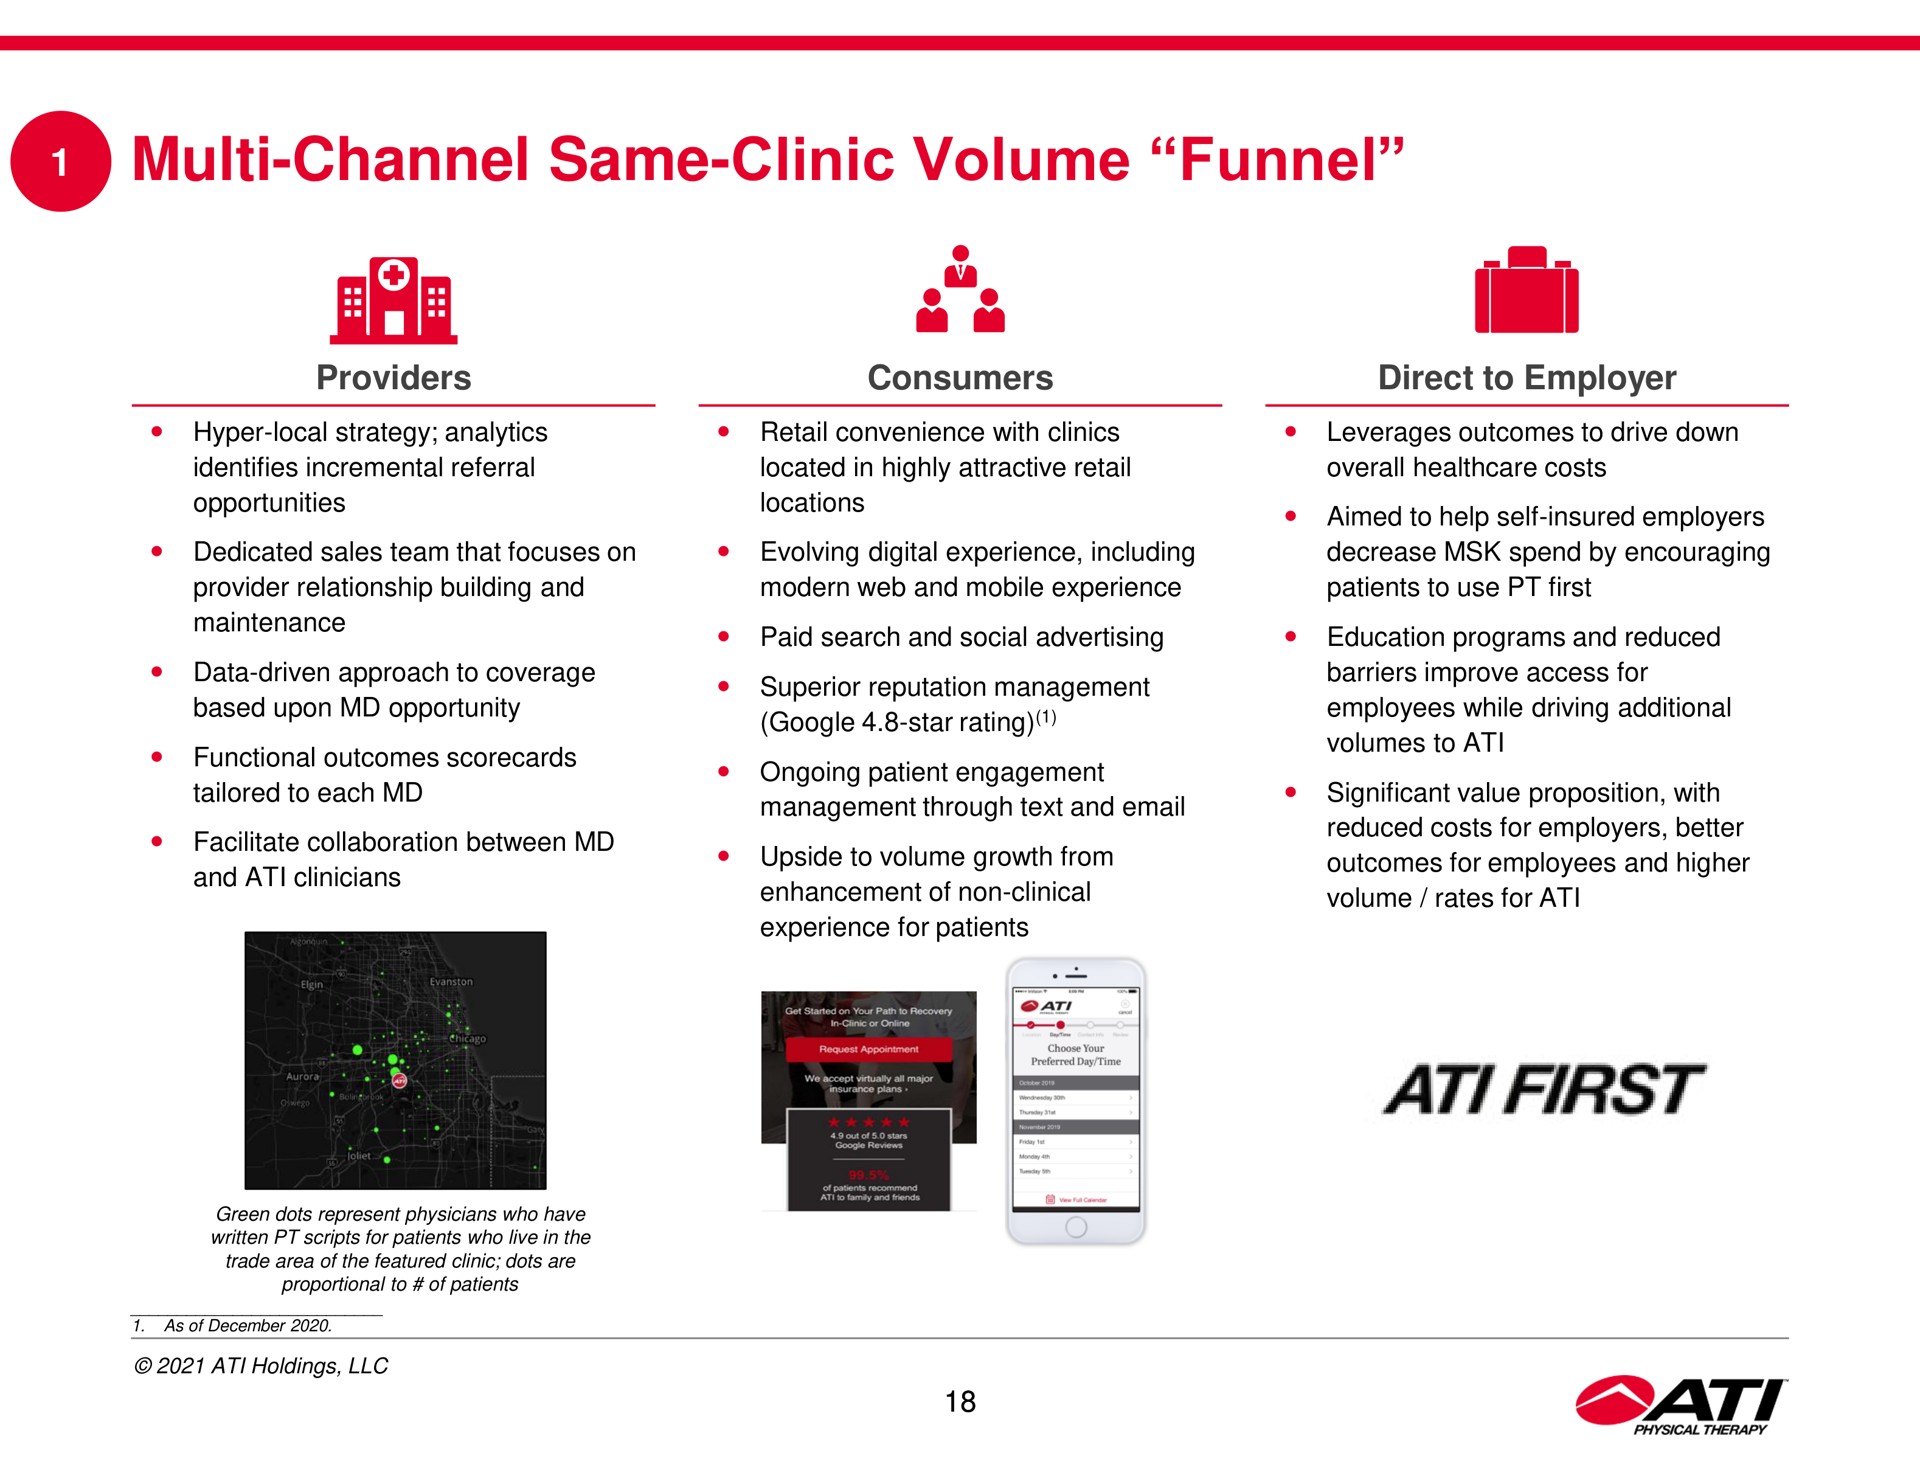 channel same clinic volume funnel all first | ATI Physical Therapy